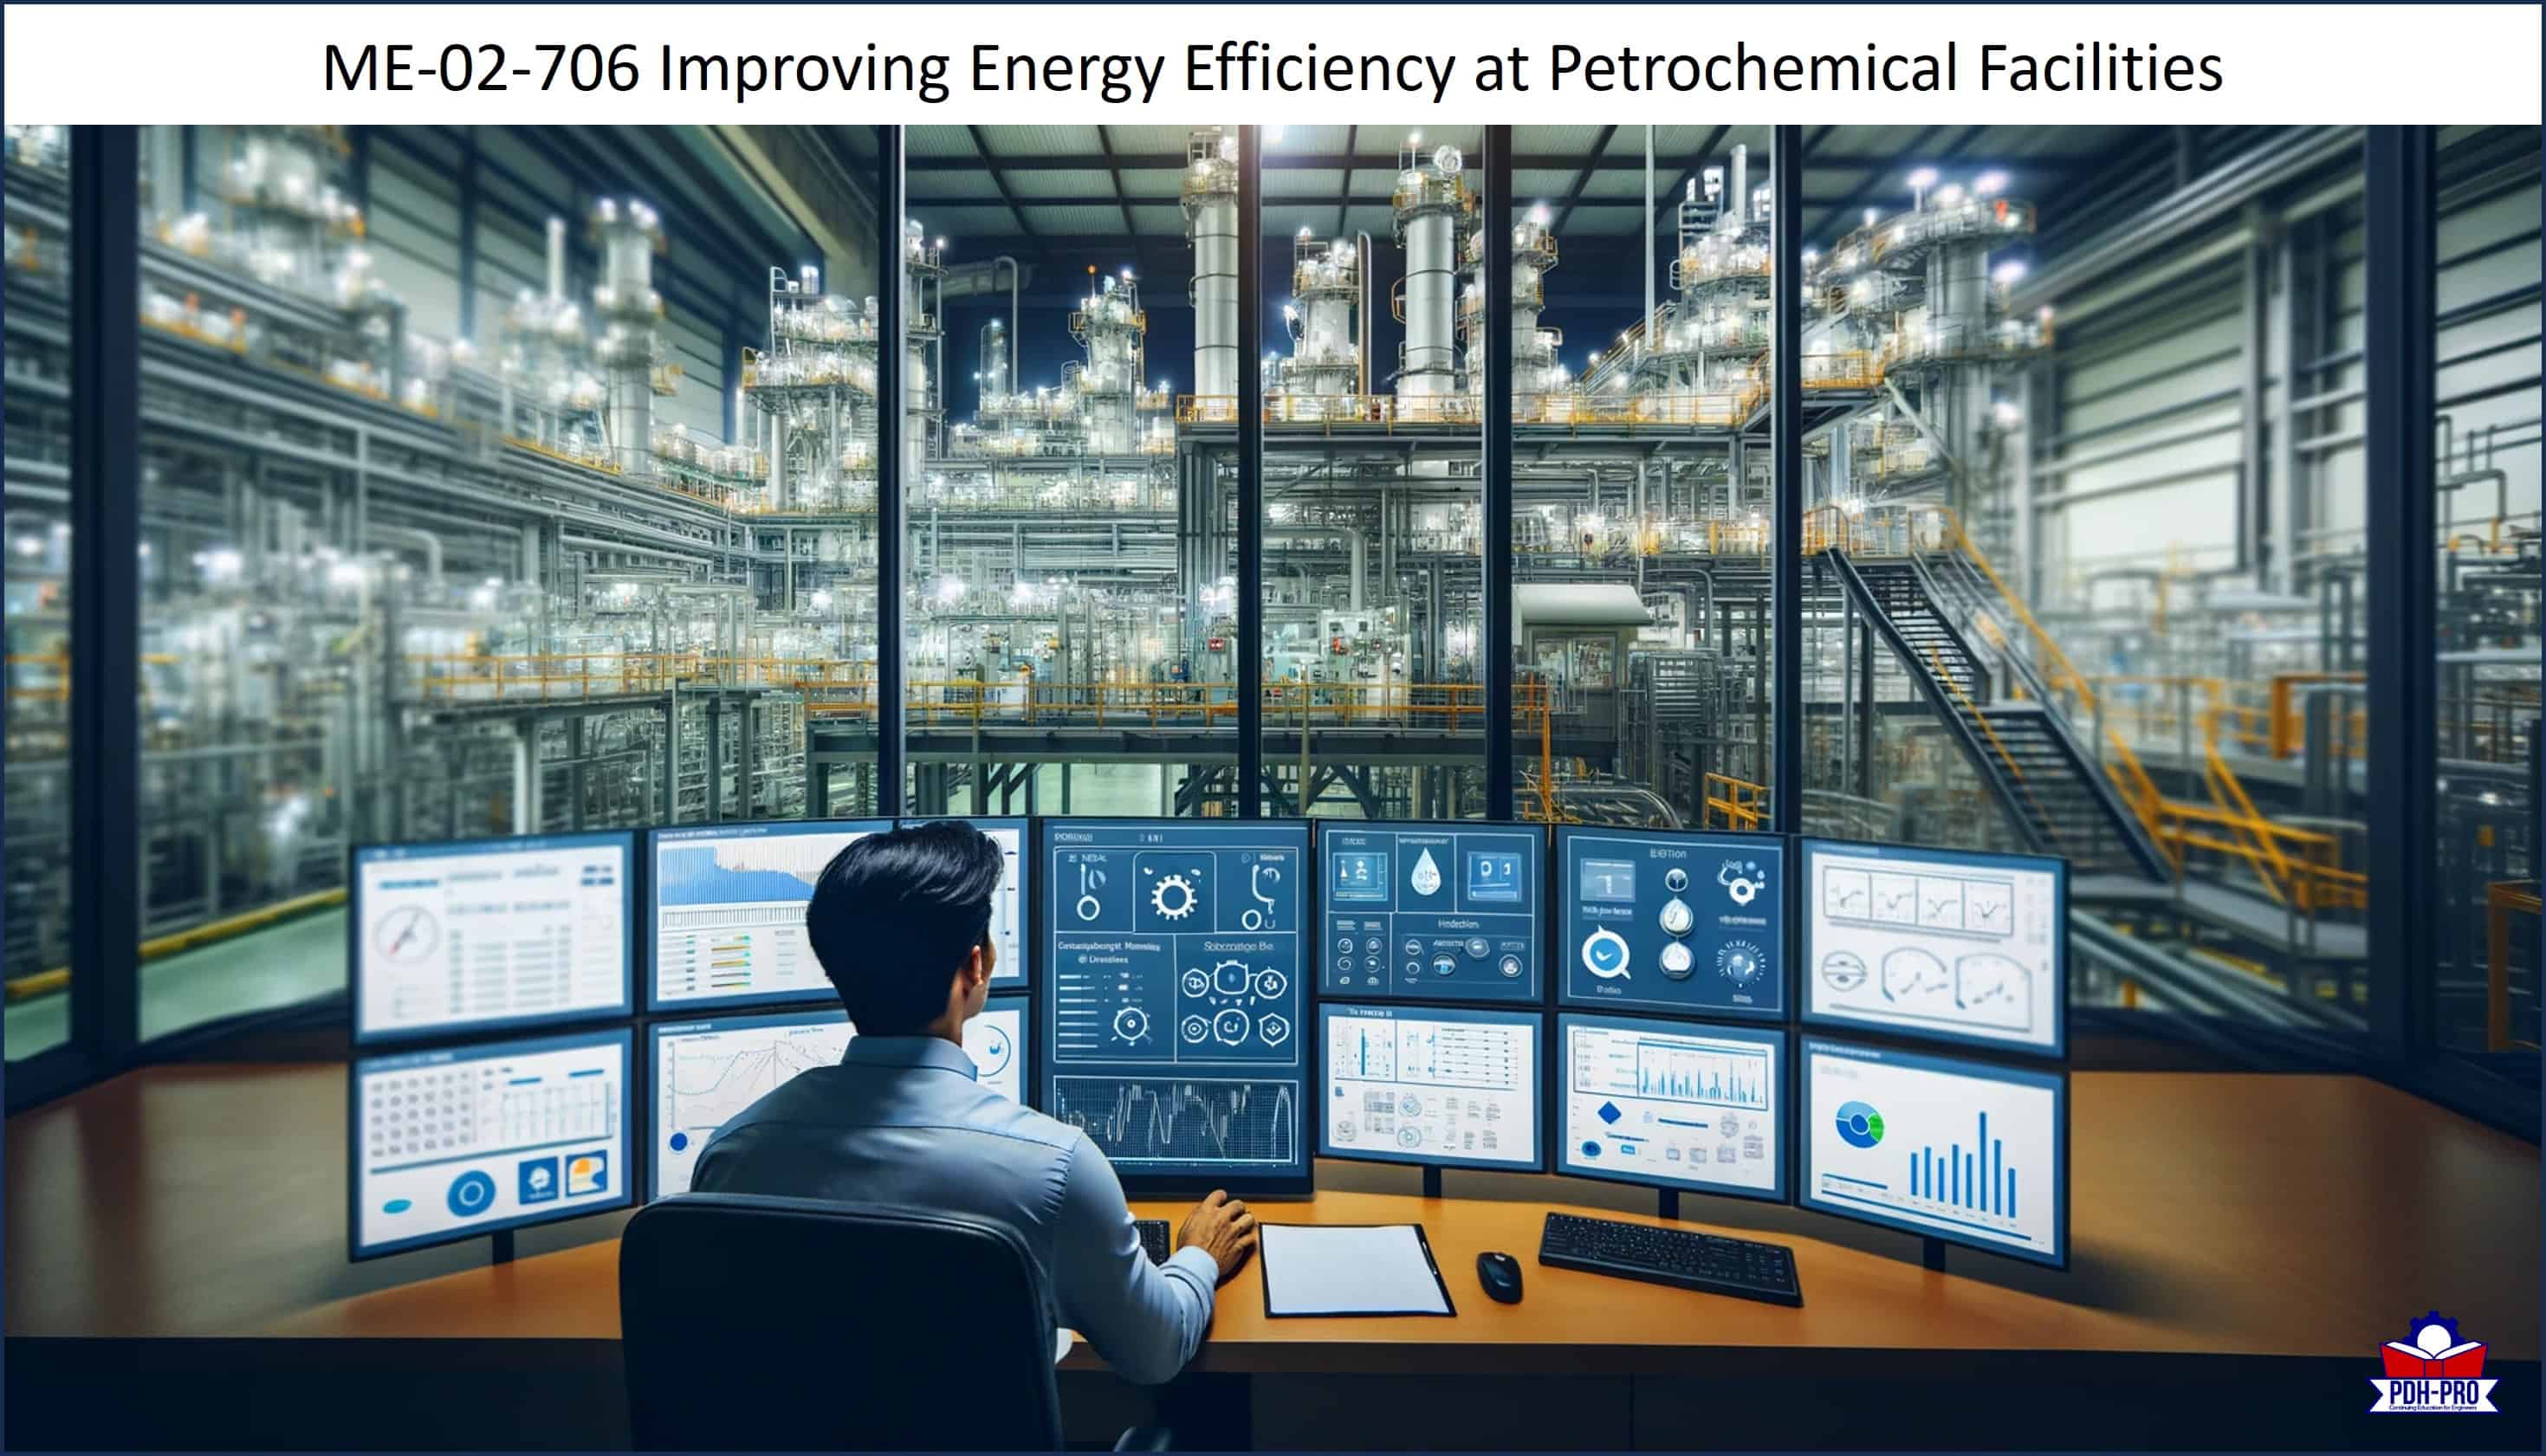 Improving Energy Efficiency at Petrochemical Facilities